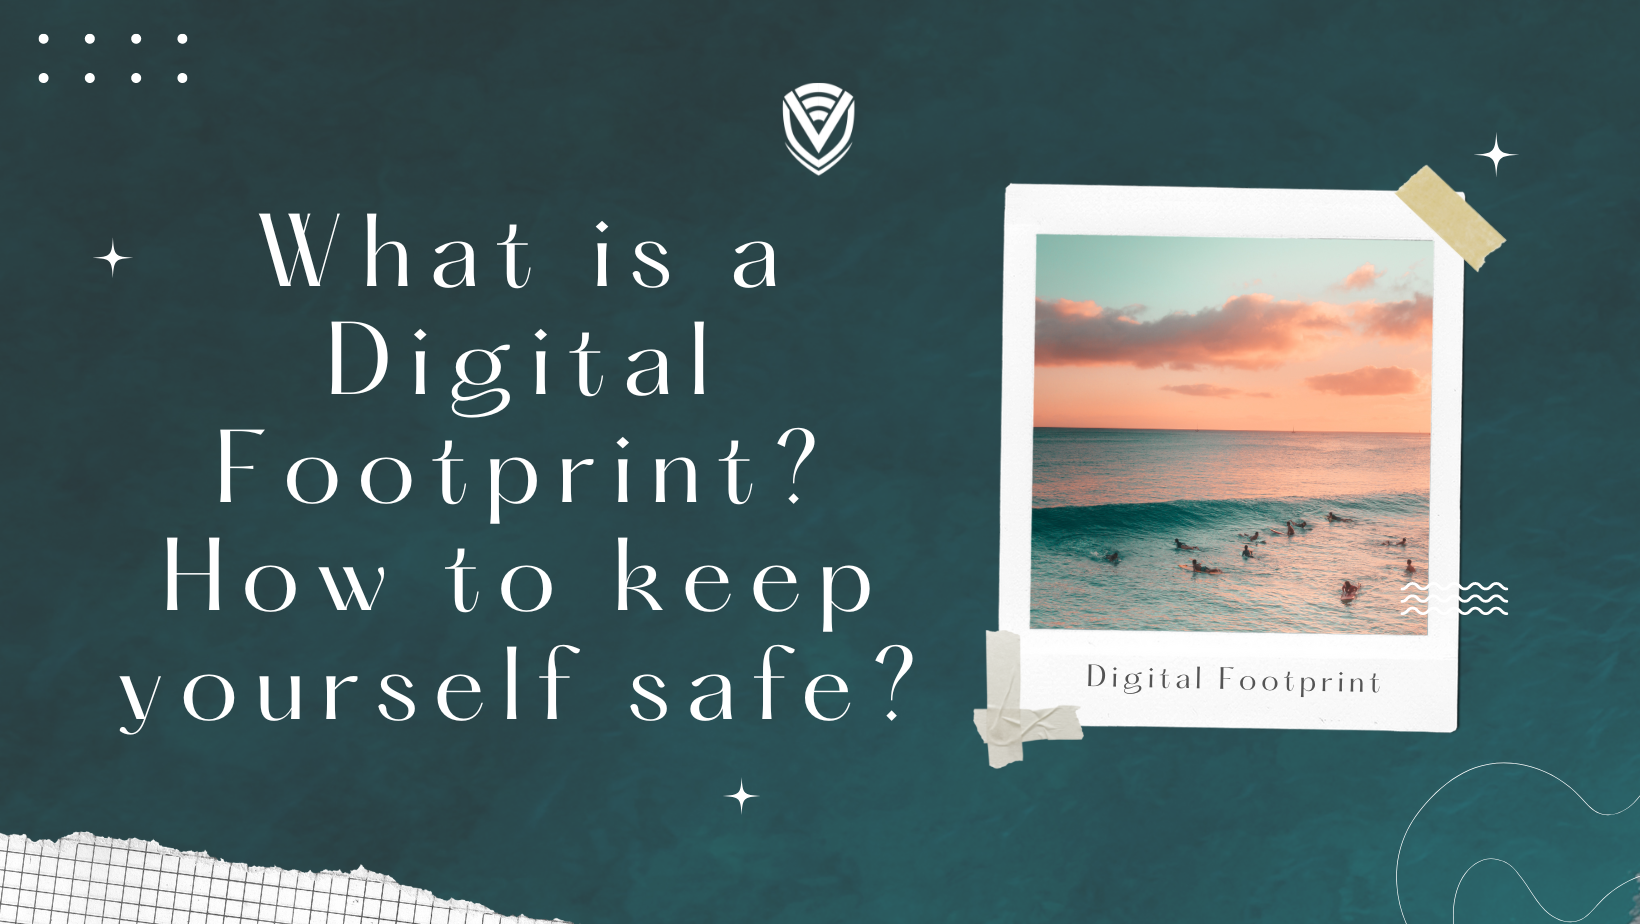 What is a Digital Footprint? How to keep yourself safe?